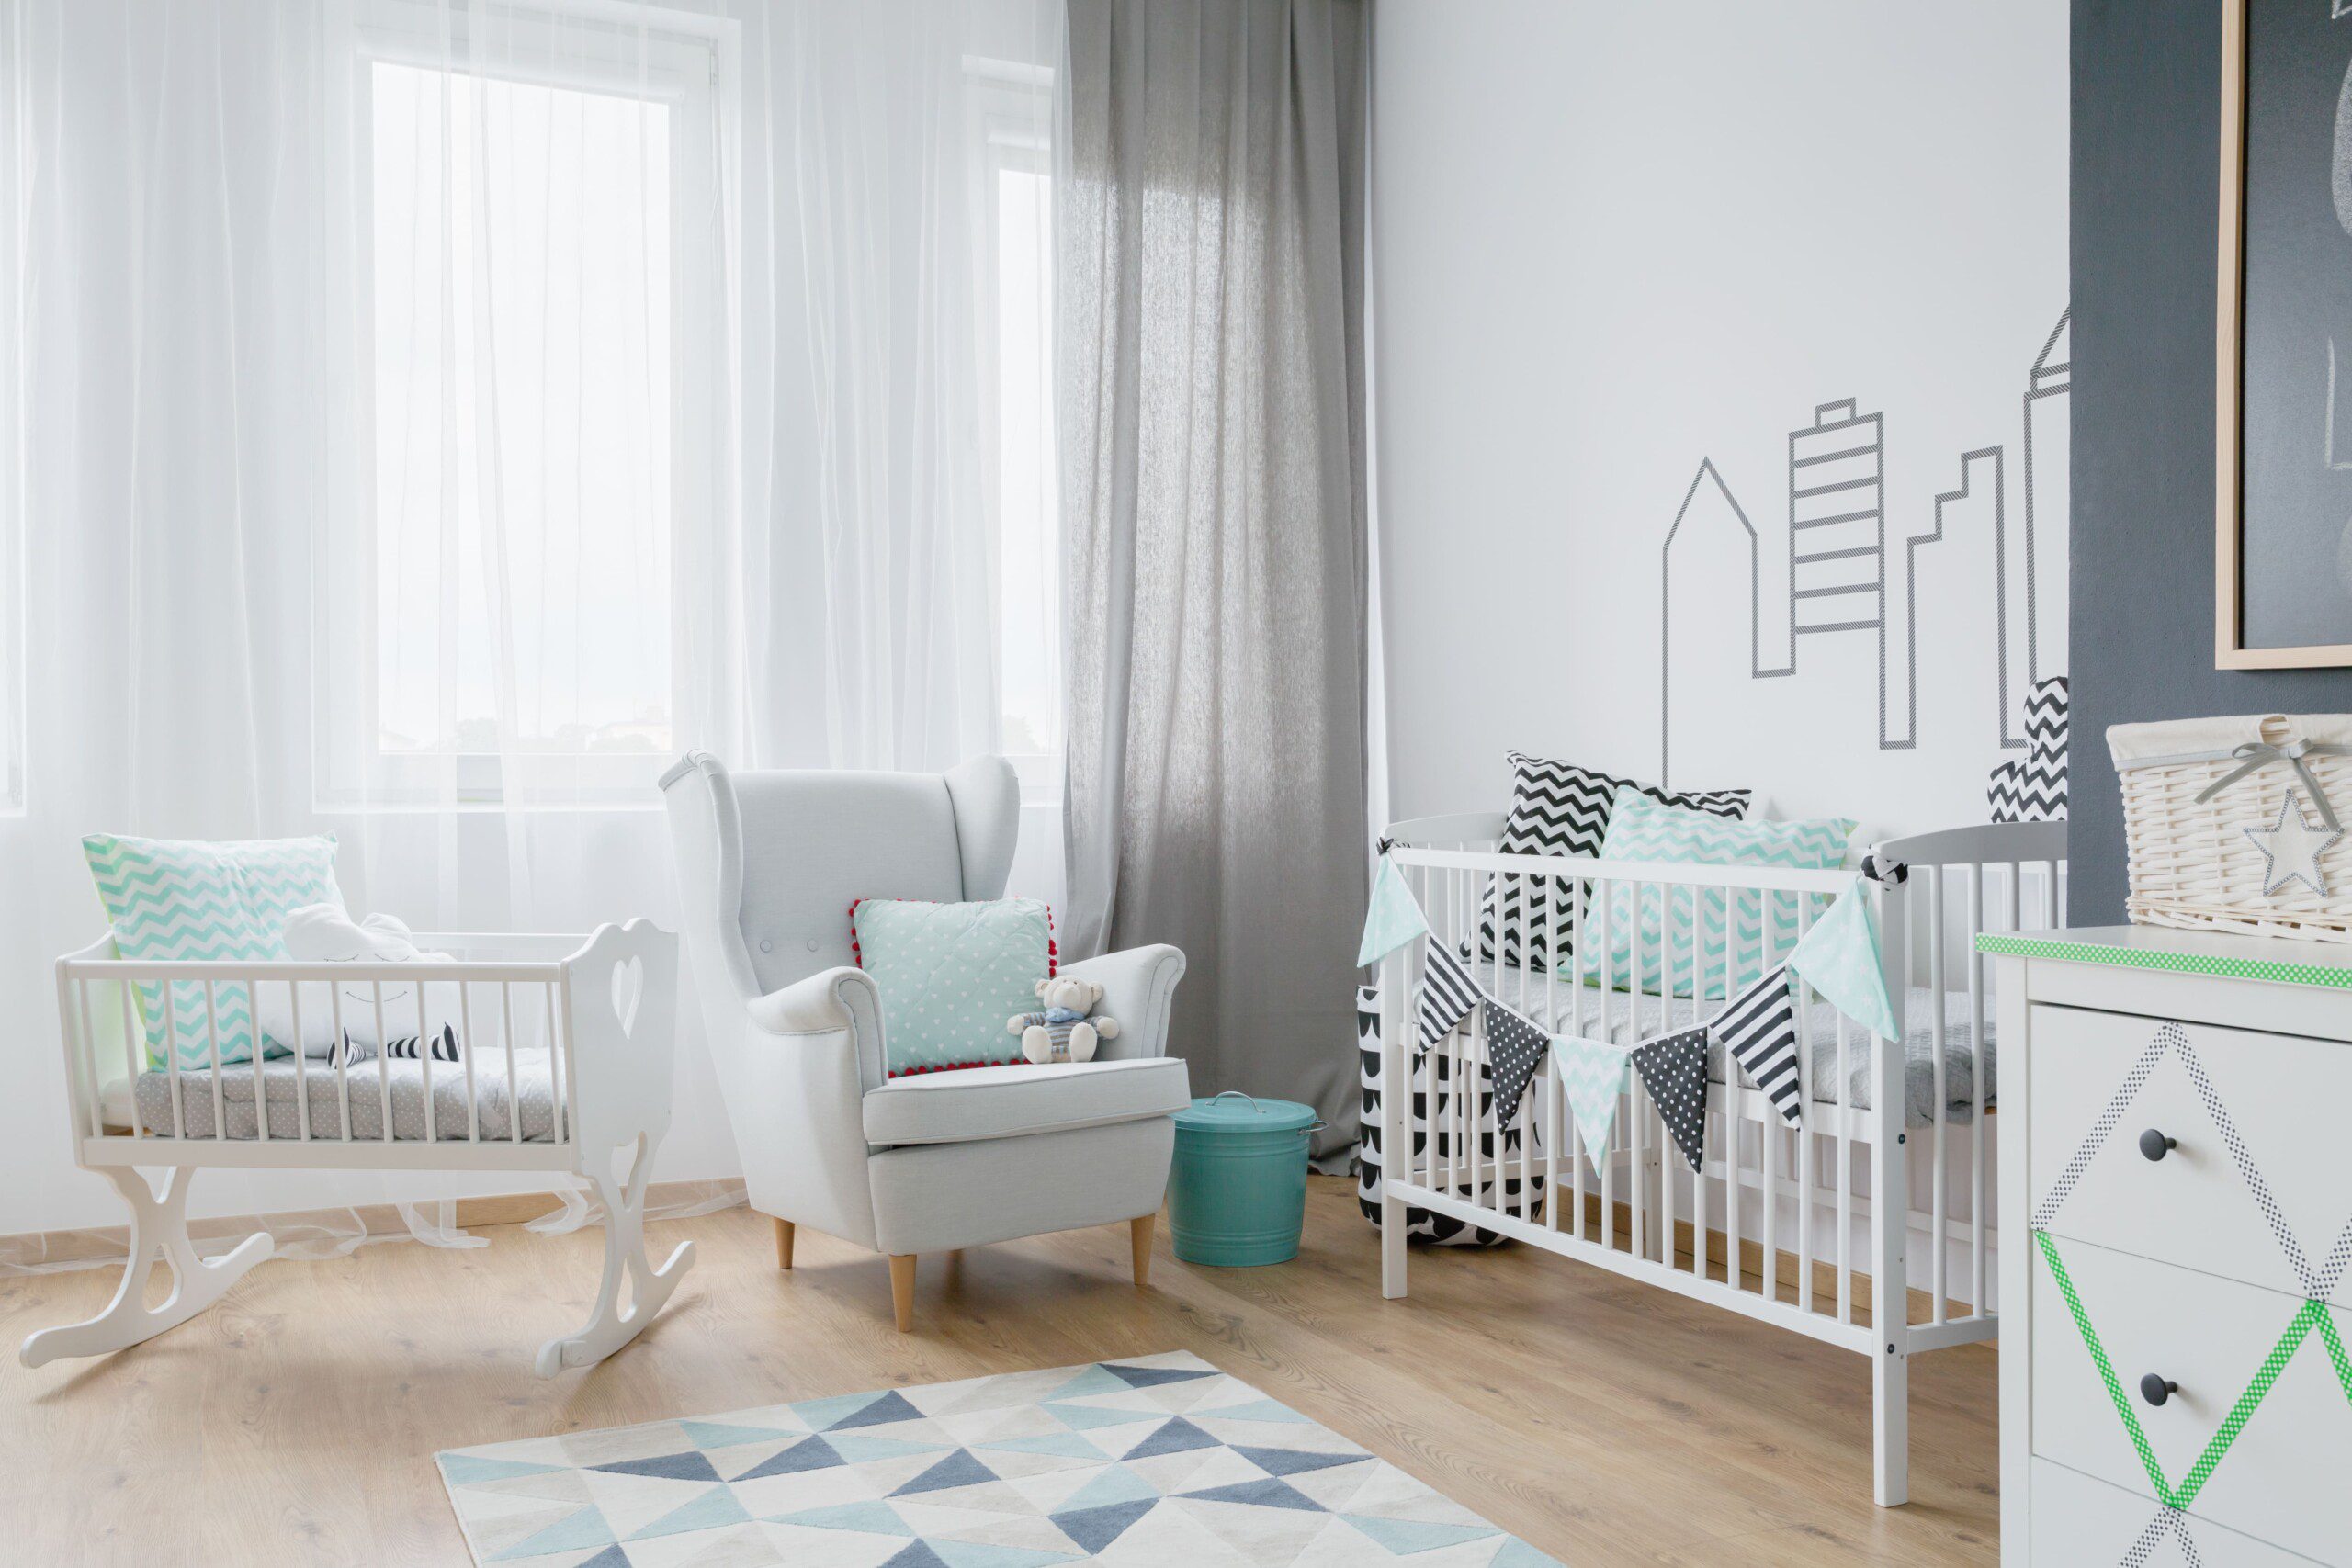 Image of a clean baby room with crib and breastfeeding chair.